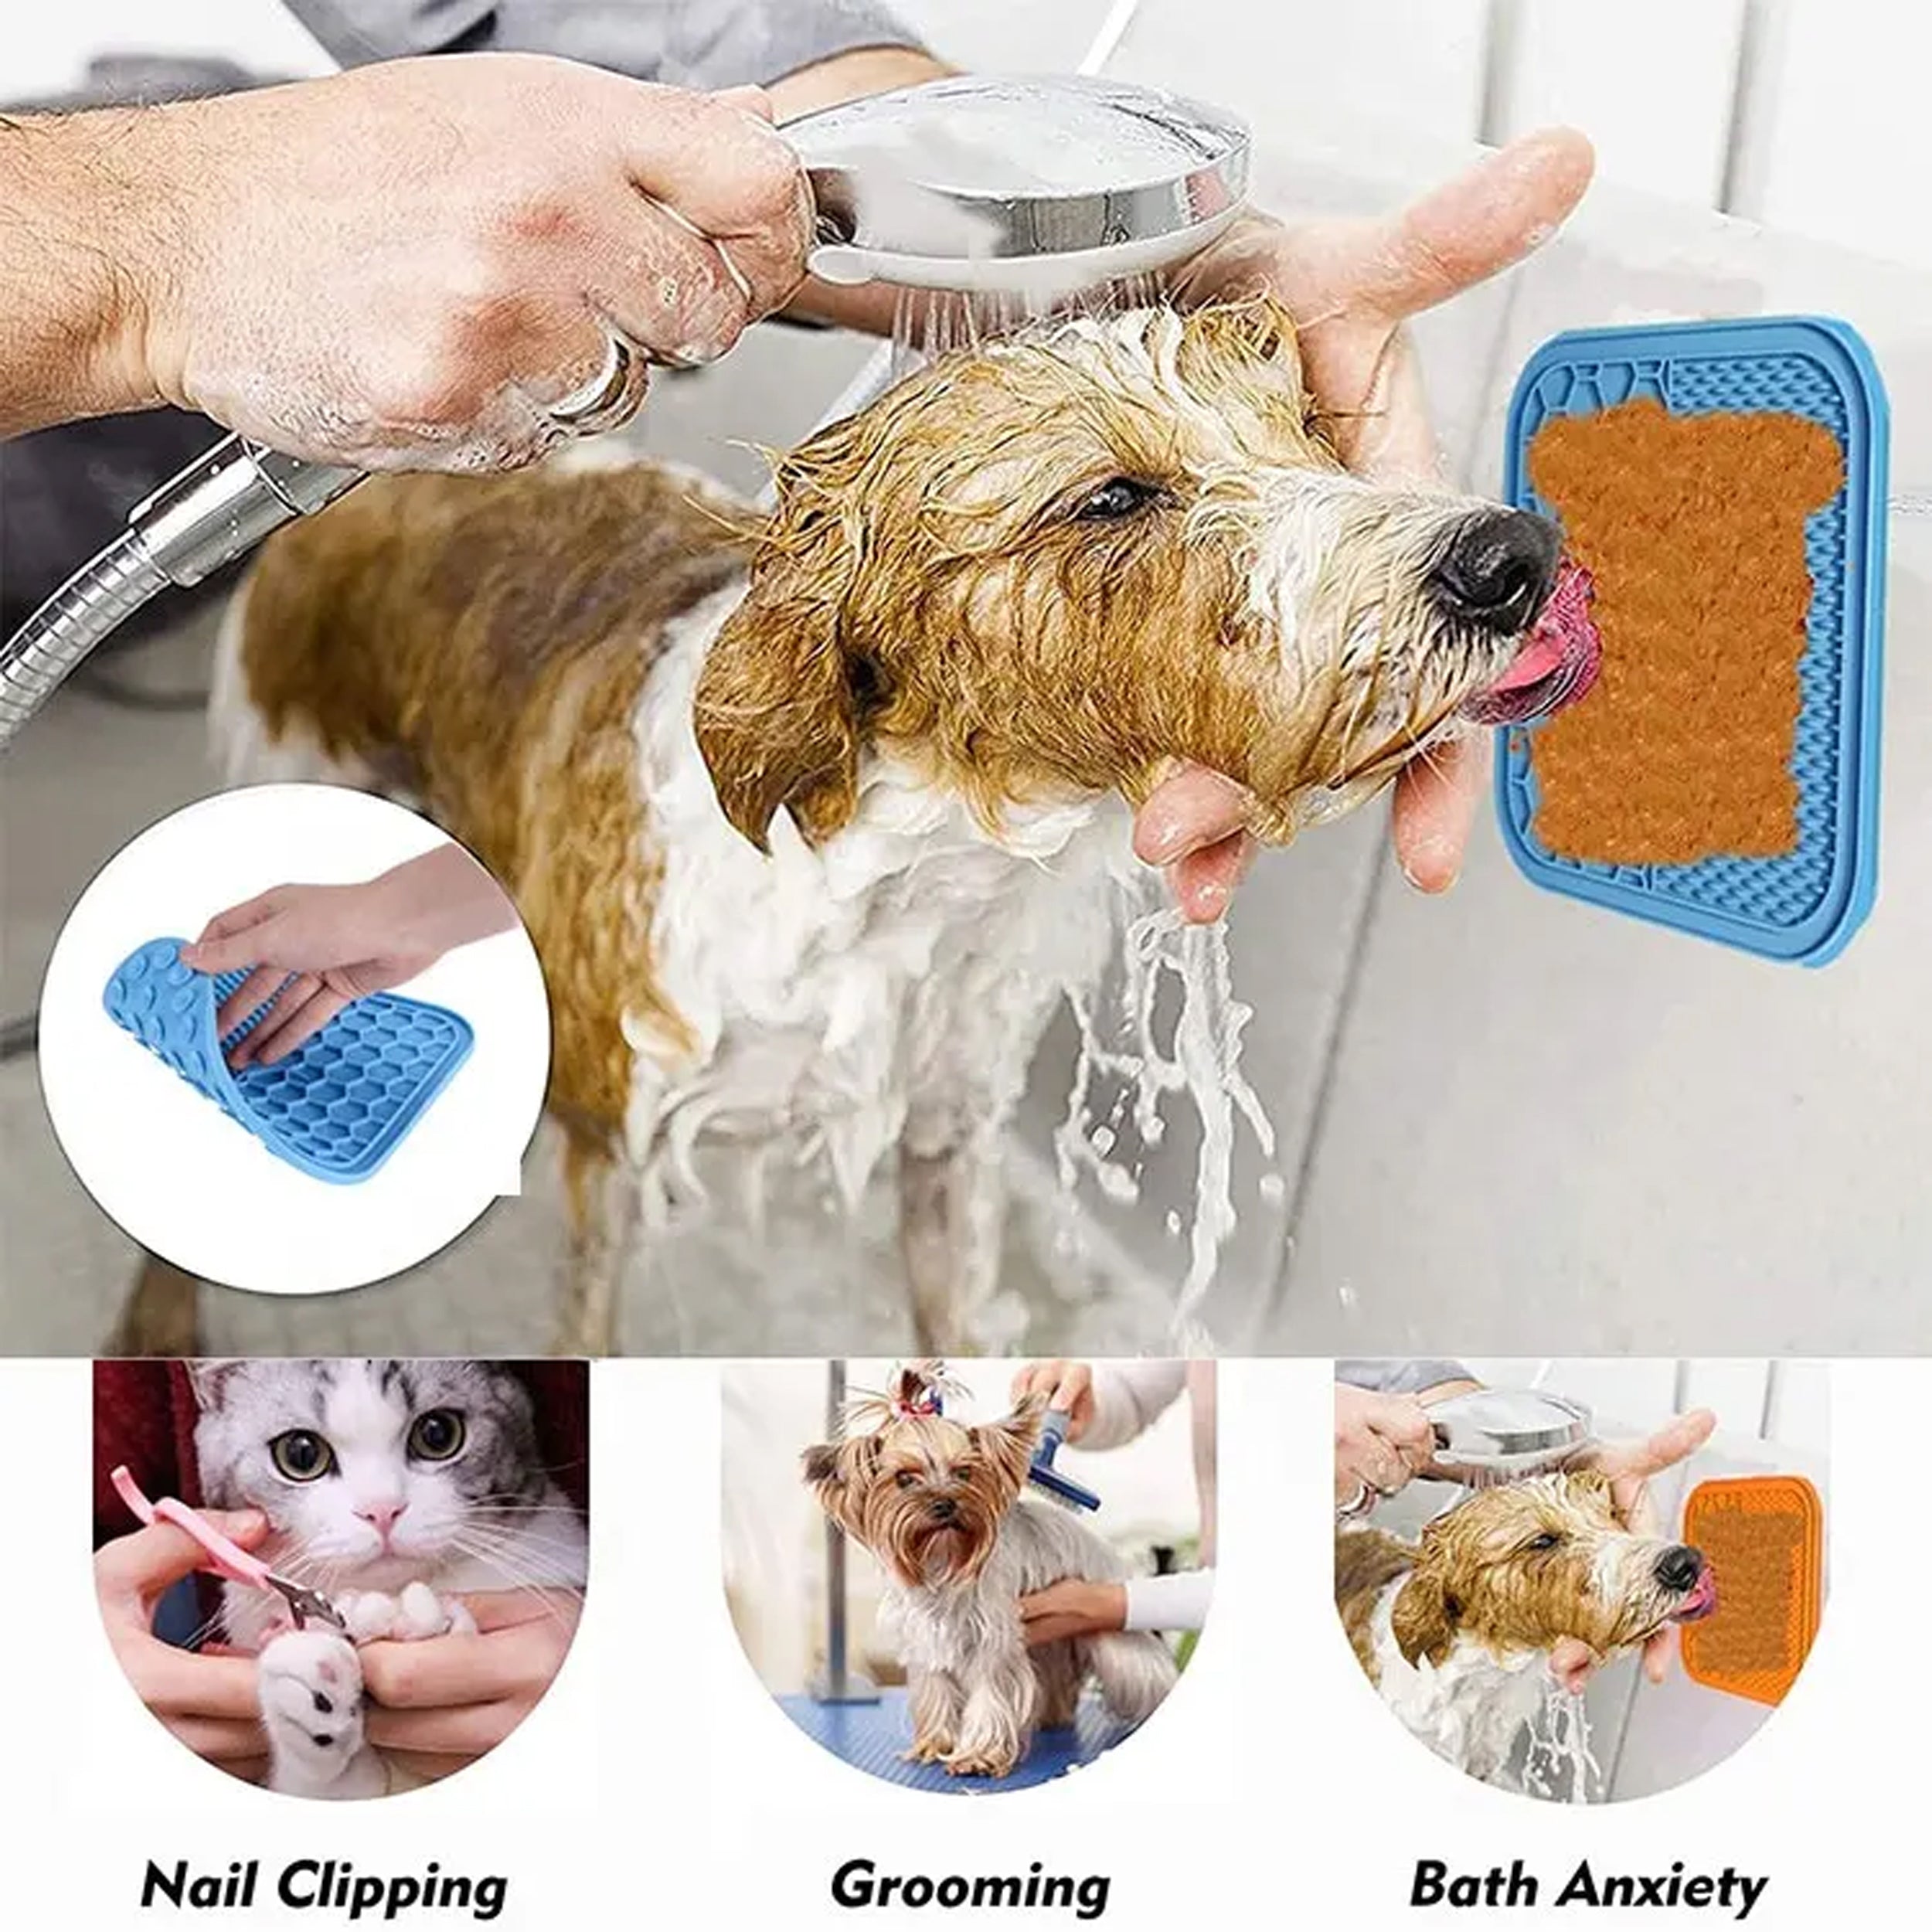 Dog Licking Mat Powerful Suction Cup Pet Bath Licking Mat Suitable For Pets  Dog Cat Peanut Butter Trimming Nails Training